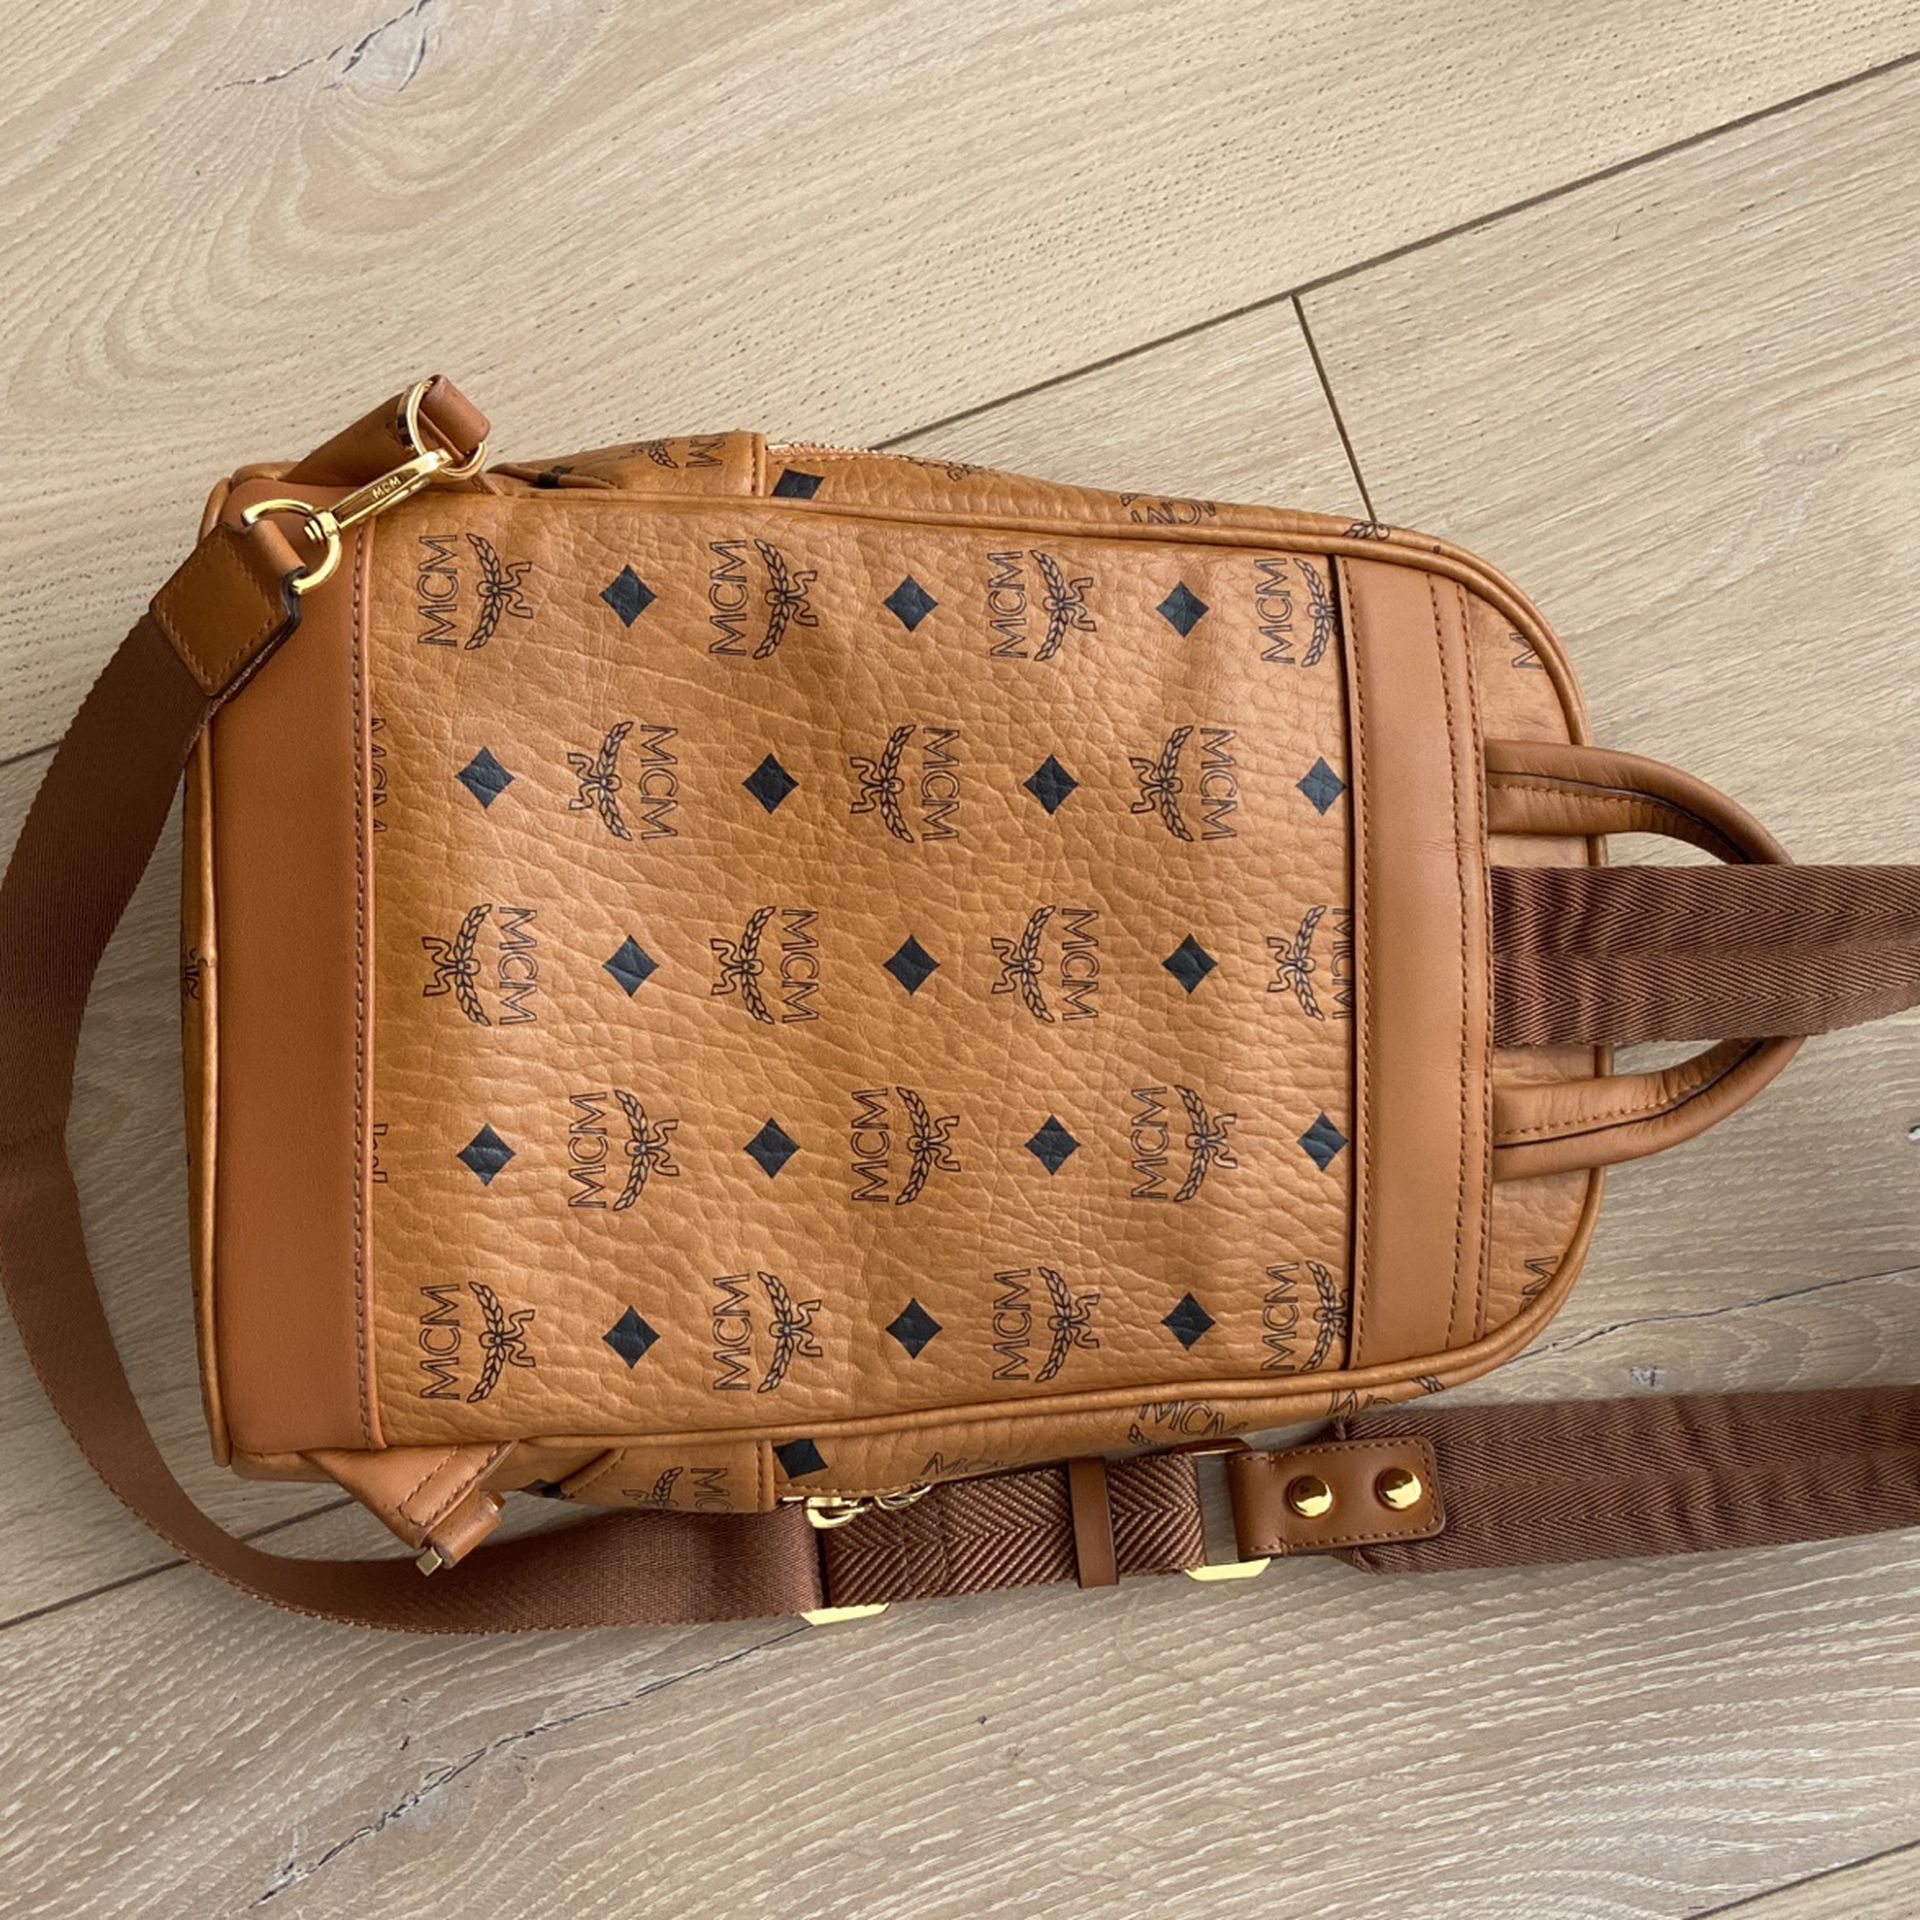 MCM MEDIUM LOGO CROSSBODY POUCH BAG for Sale in Peck Slip, NY - OfferUp